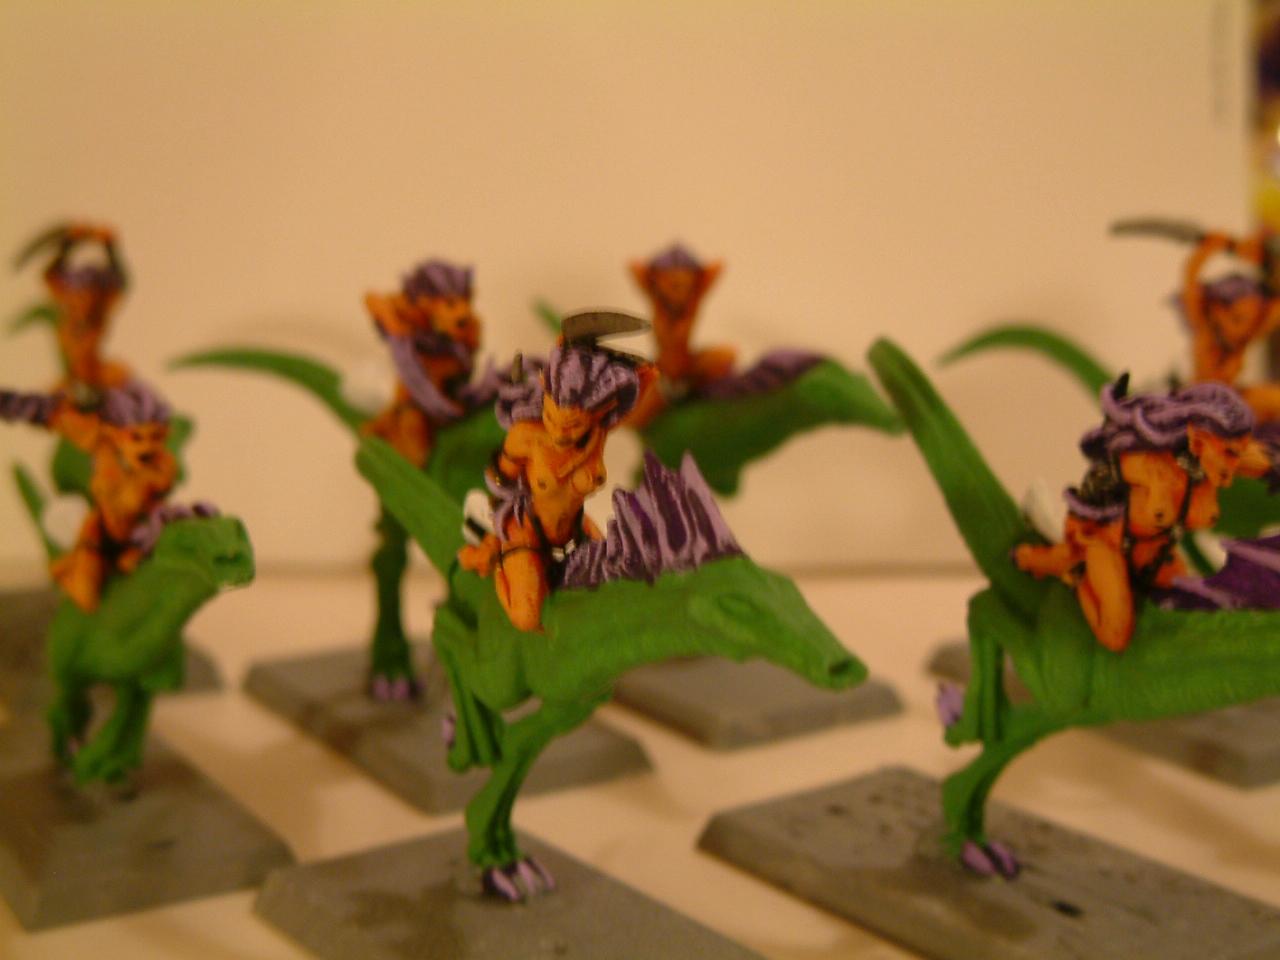 Chaos, Classic, Daemonettes, Daemons, Fiends, Green, Old, Orange, Out Of Production, Purple, Slaanesh, Warhammer 40,000